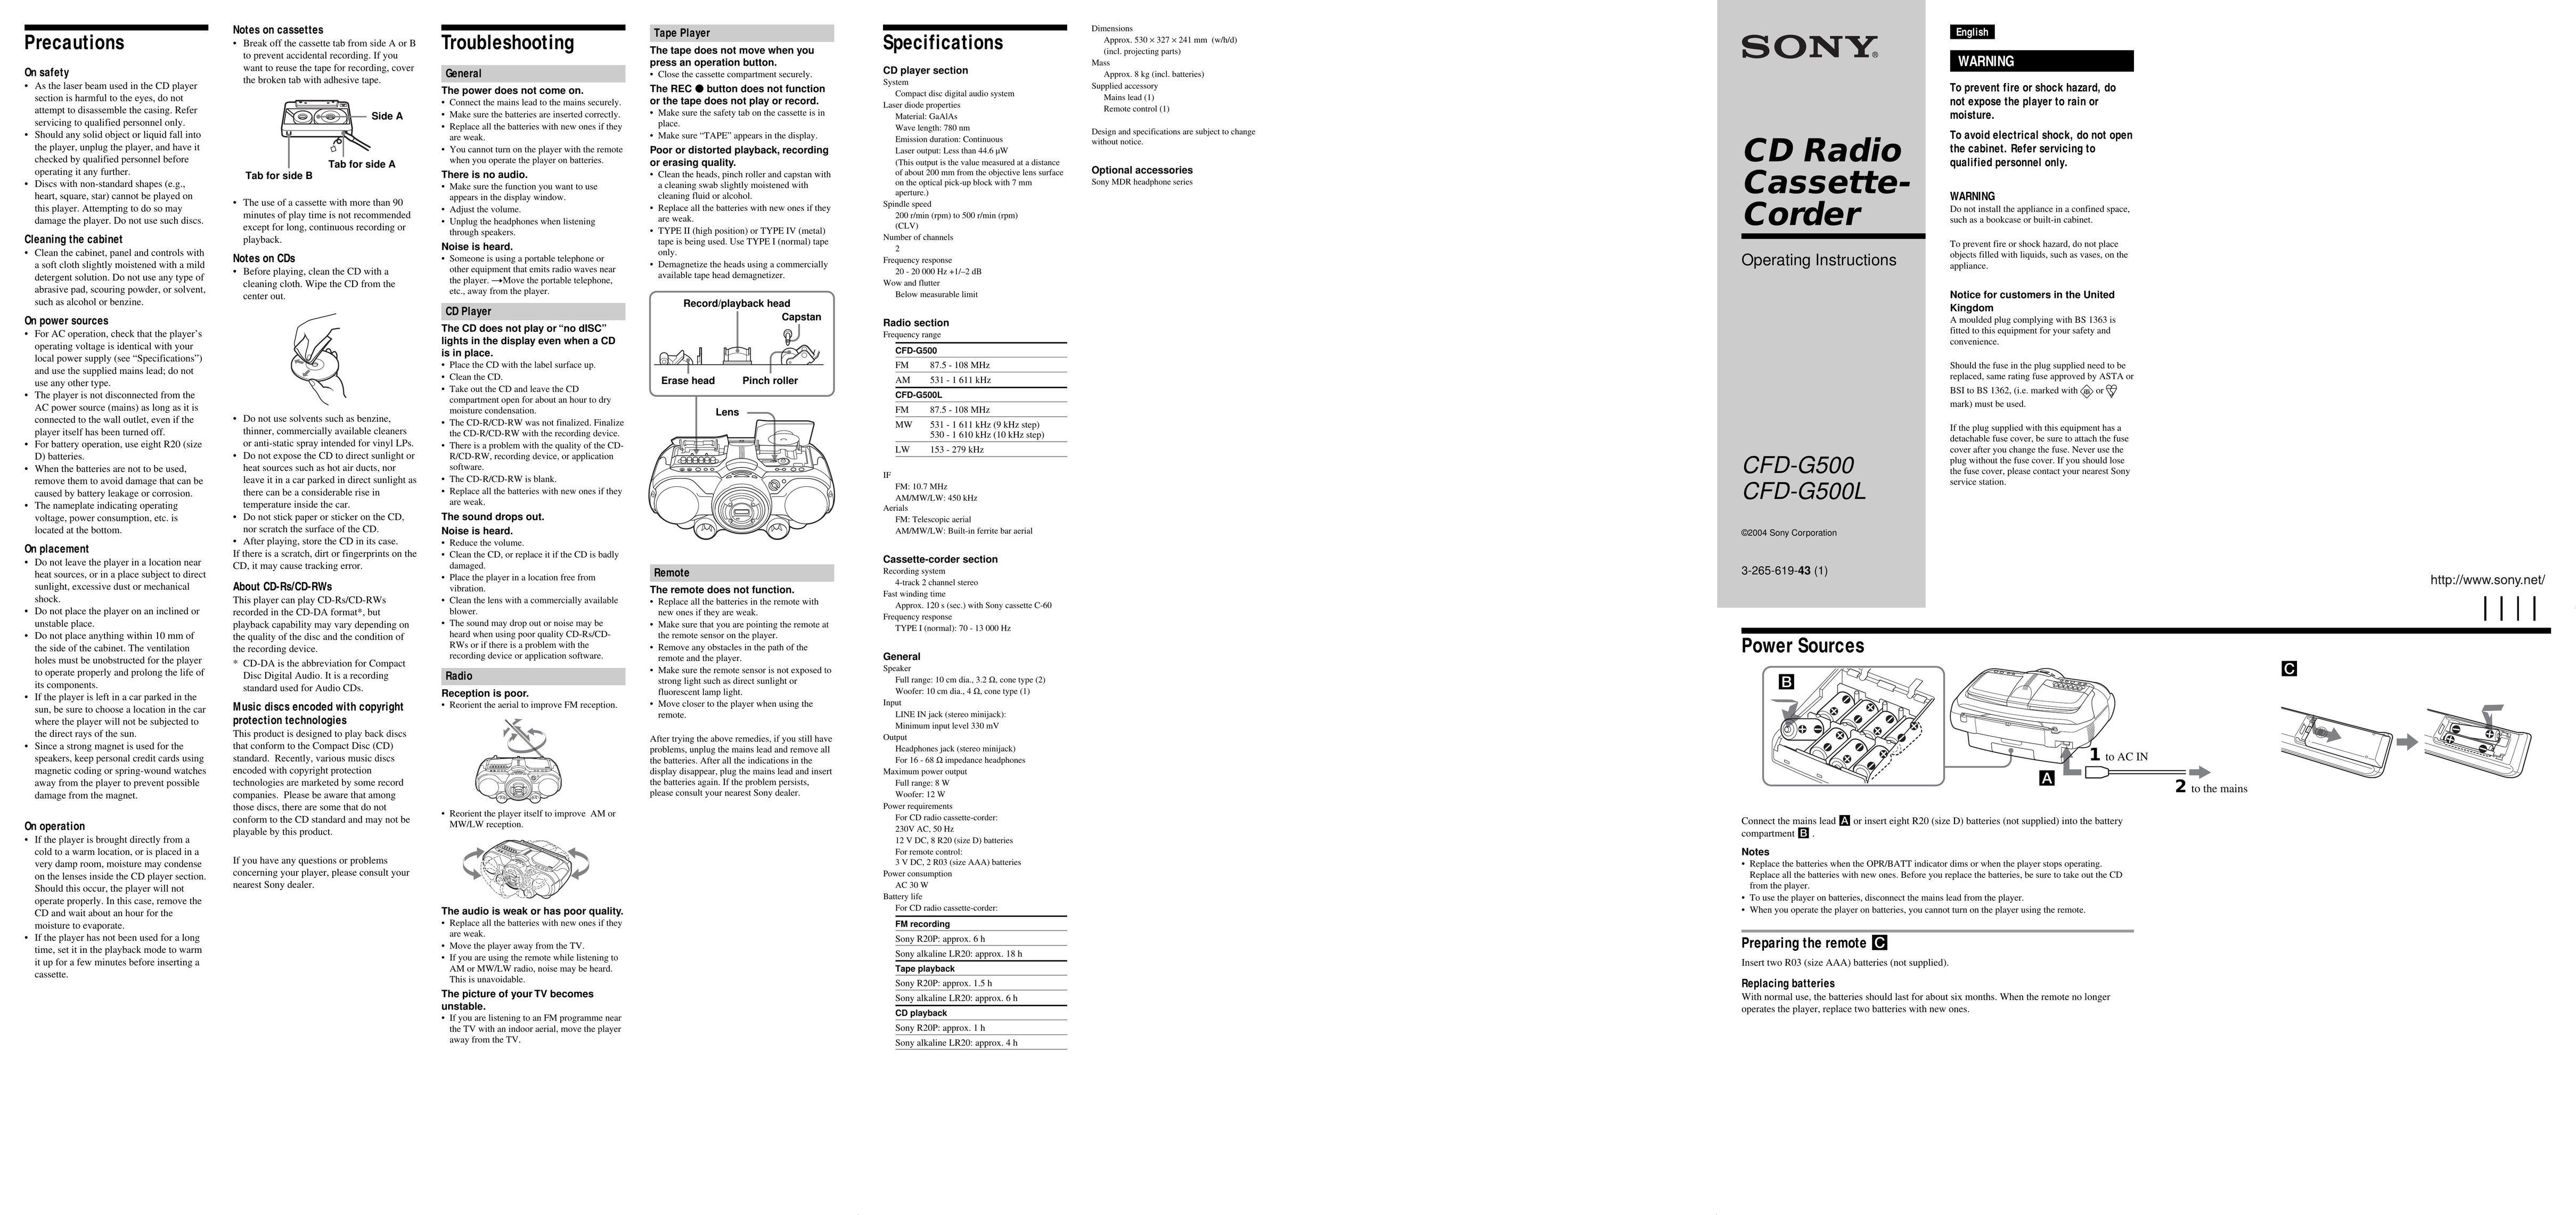 Sony CFD-G500L Microcassette Recorder User Manual